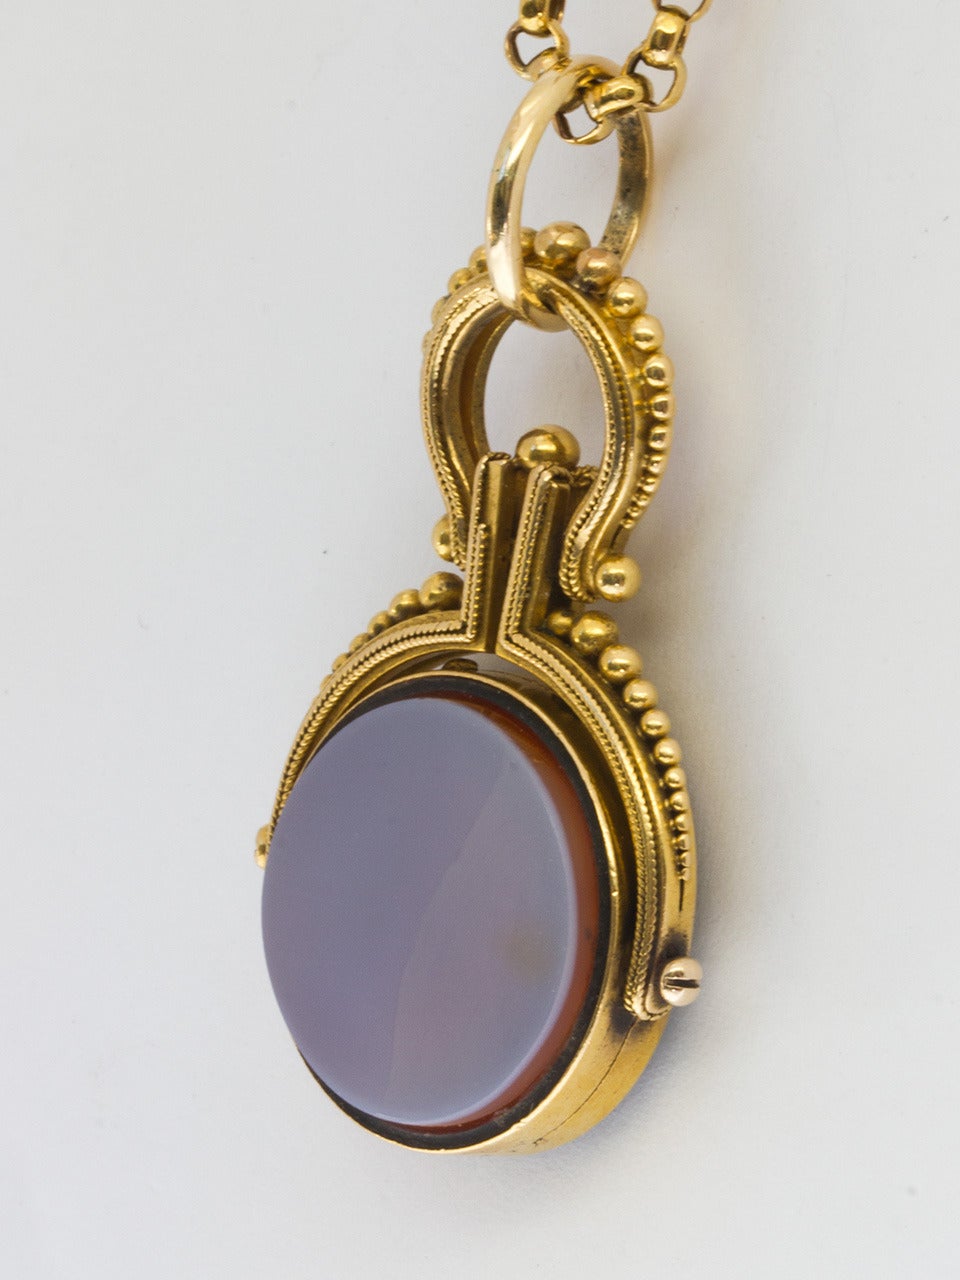 14K yellow gold antique spinner locket with bezel set hard stone carnelian on one side black onyx on the other. Substantial gold frame is decorated with fine braided trim and graduated size gold bead design. Worn on a beautiful round link antique 9K